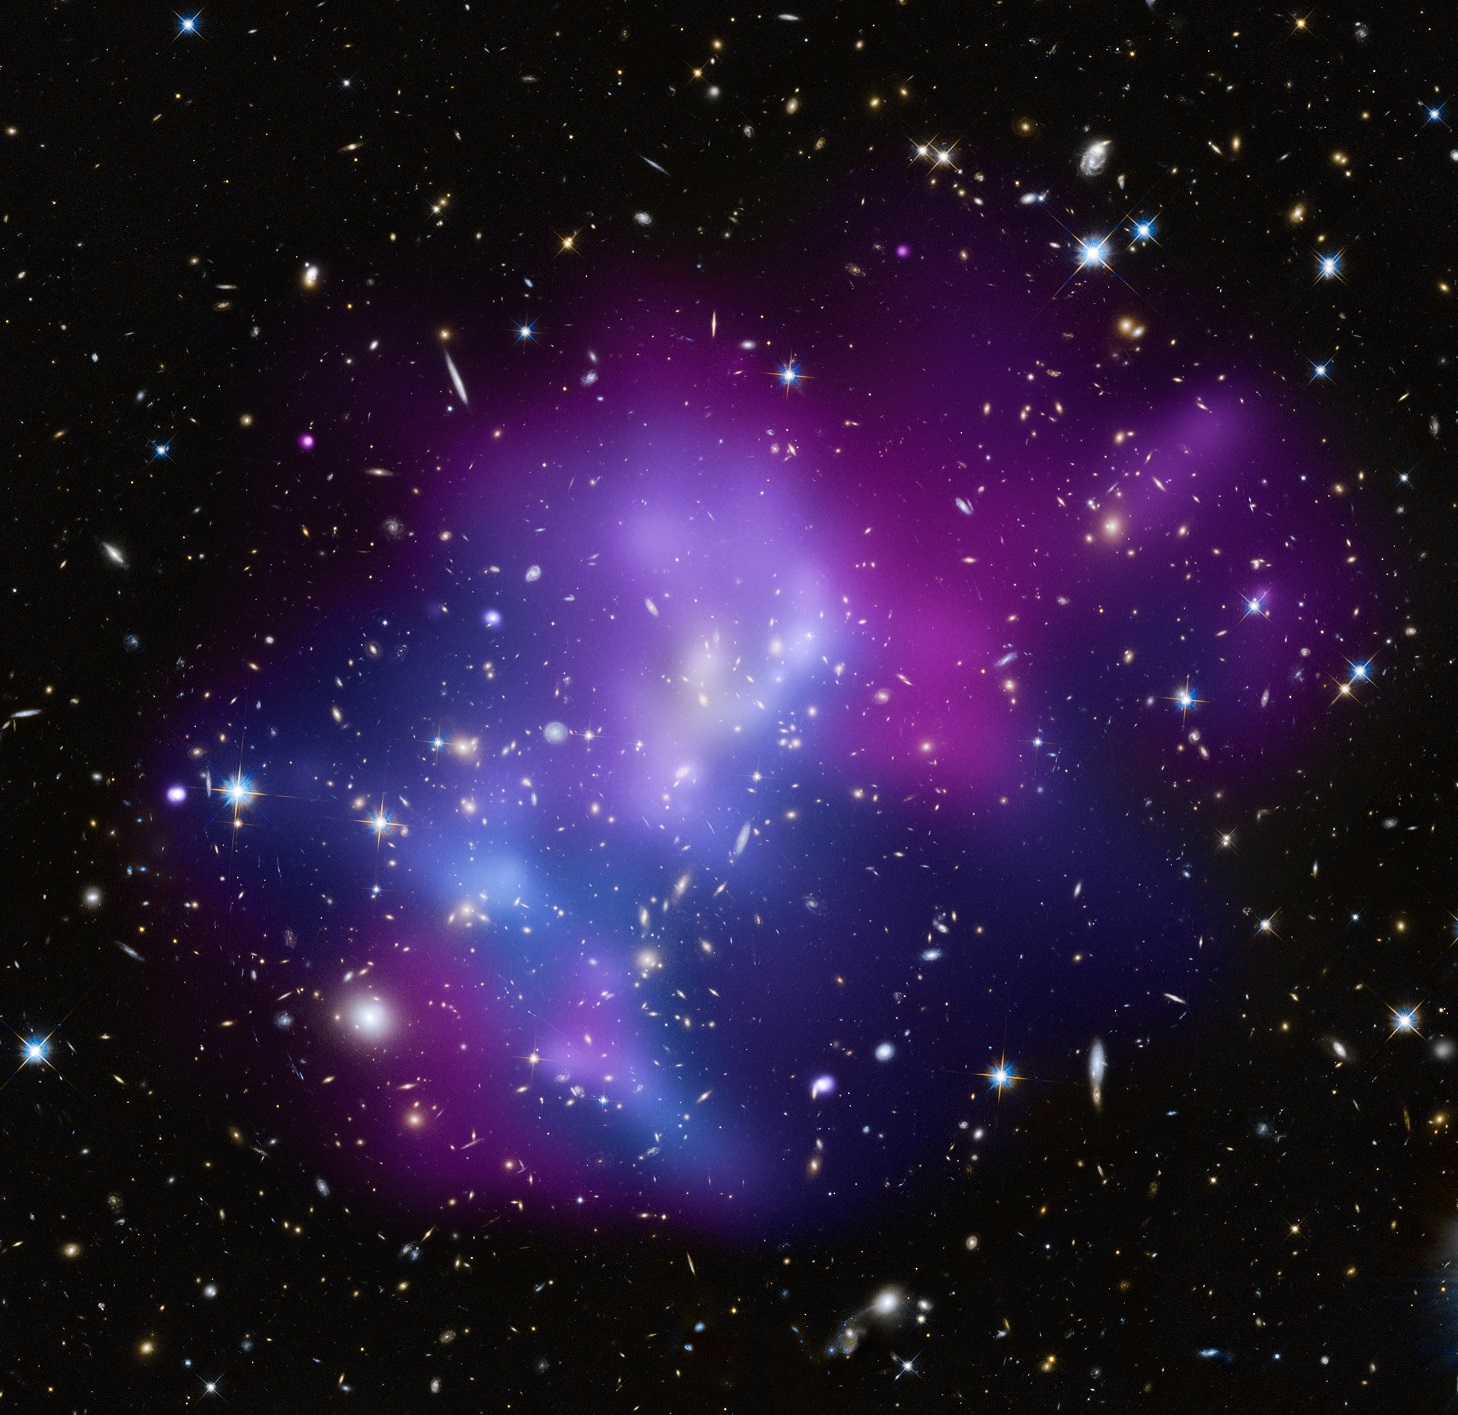 Galaxy Cluster Image